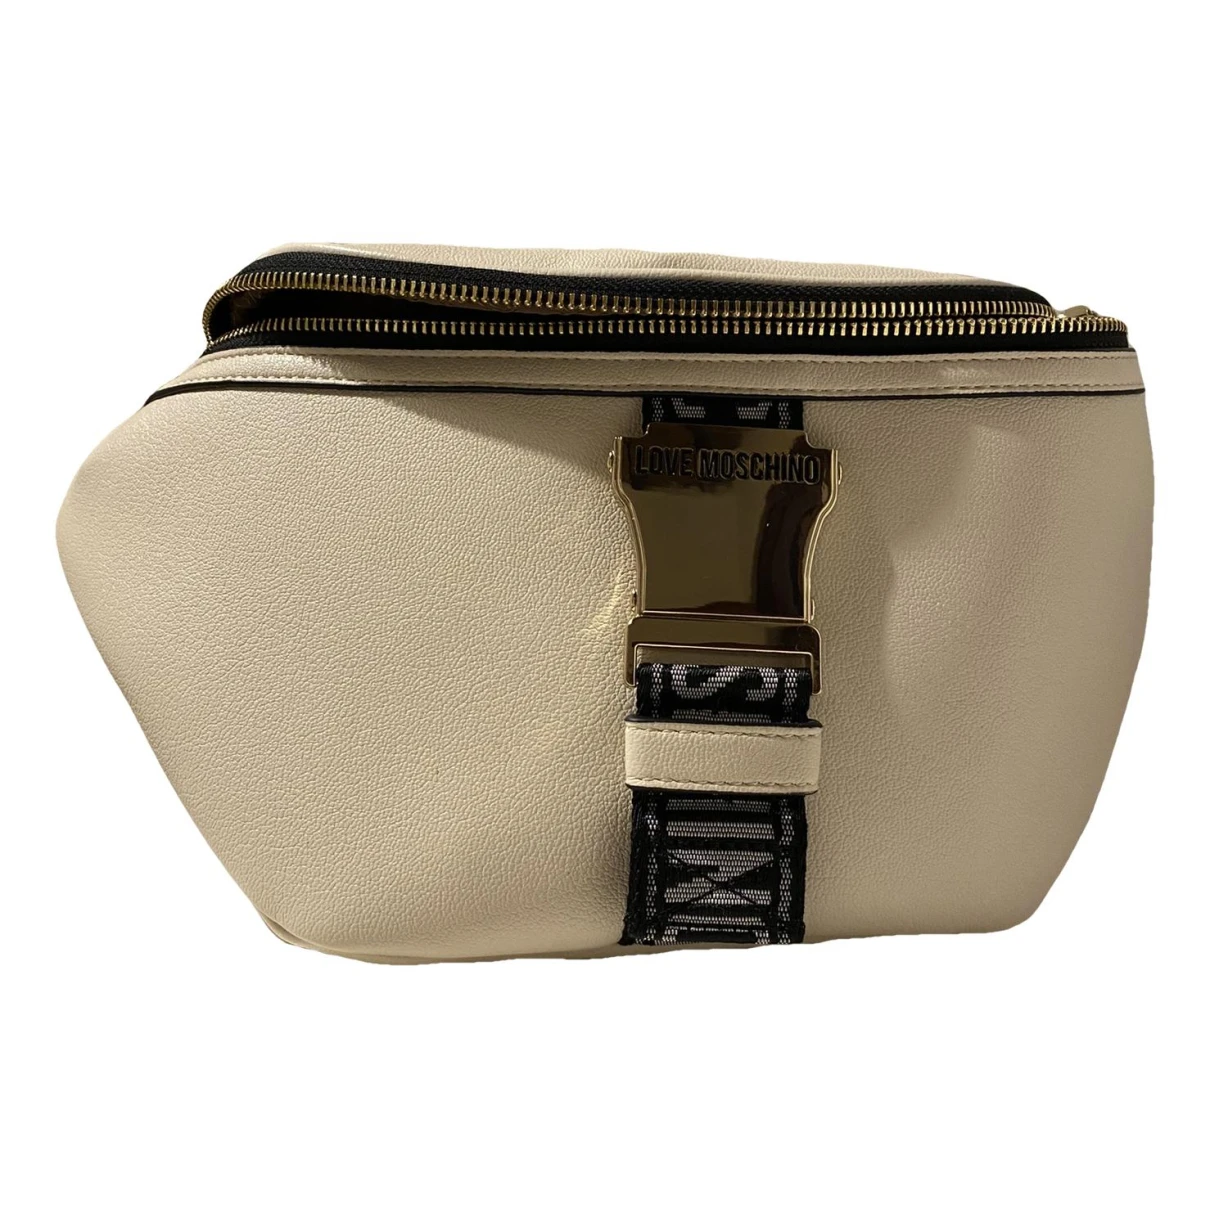 Pre-owned Moschino Love Leather Handbag In Beige